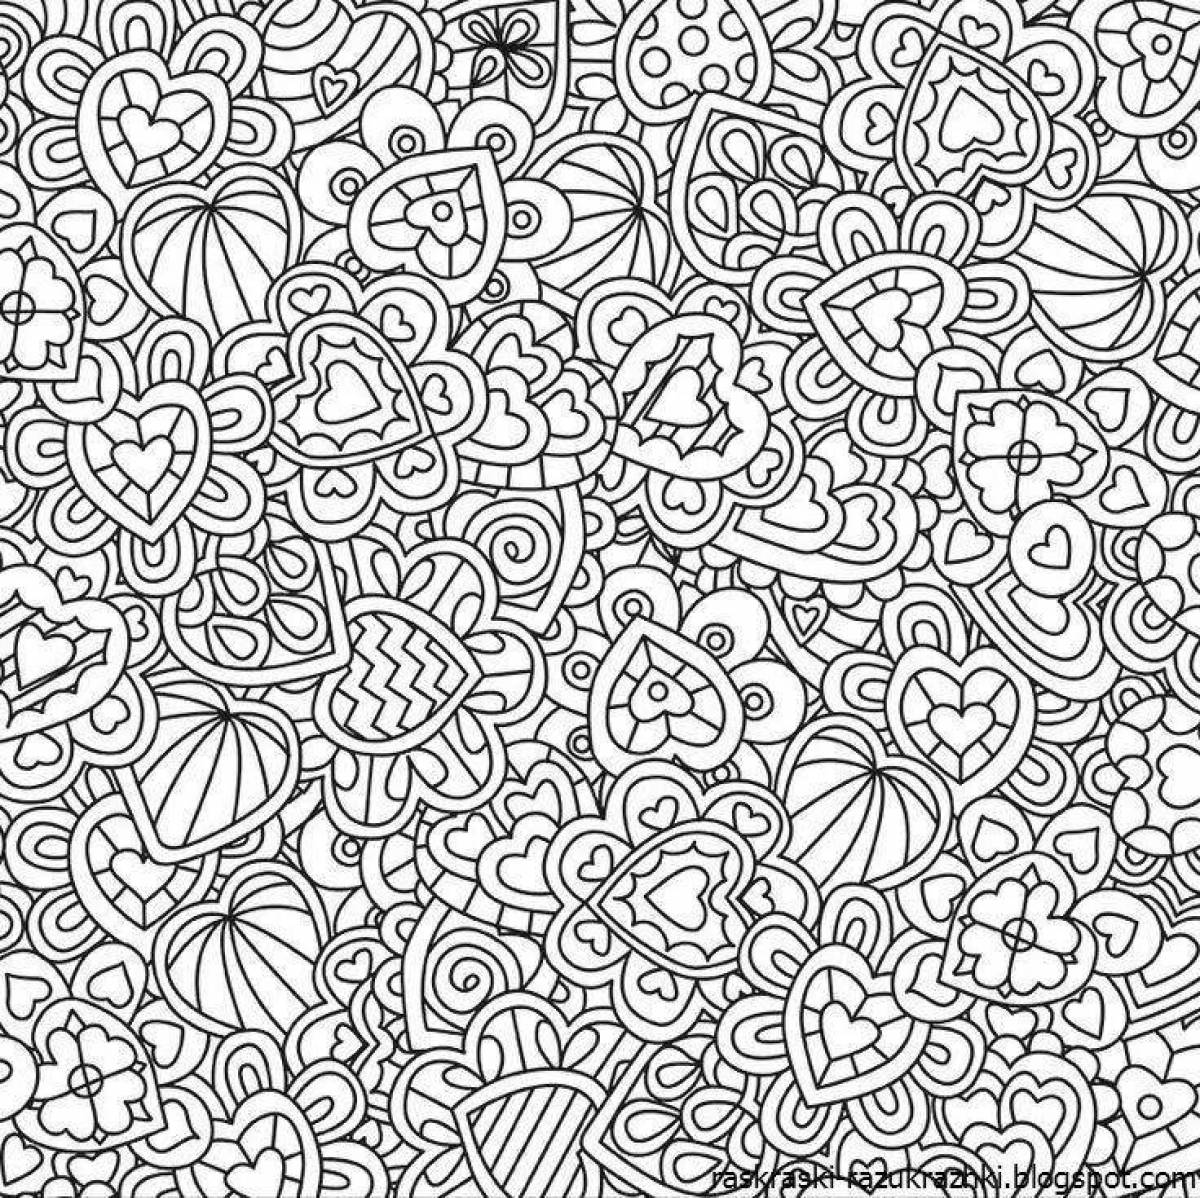 Inspirational anti-stress little coloring book